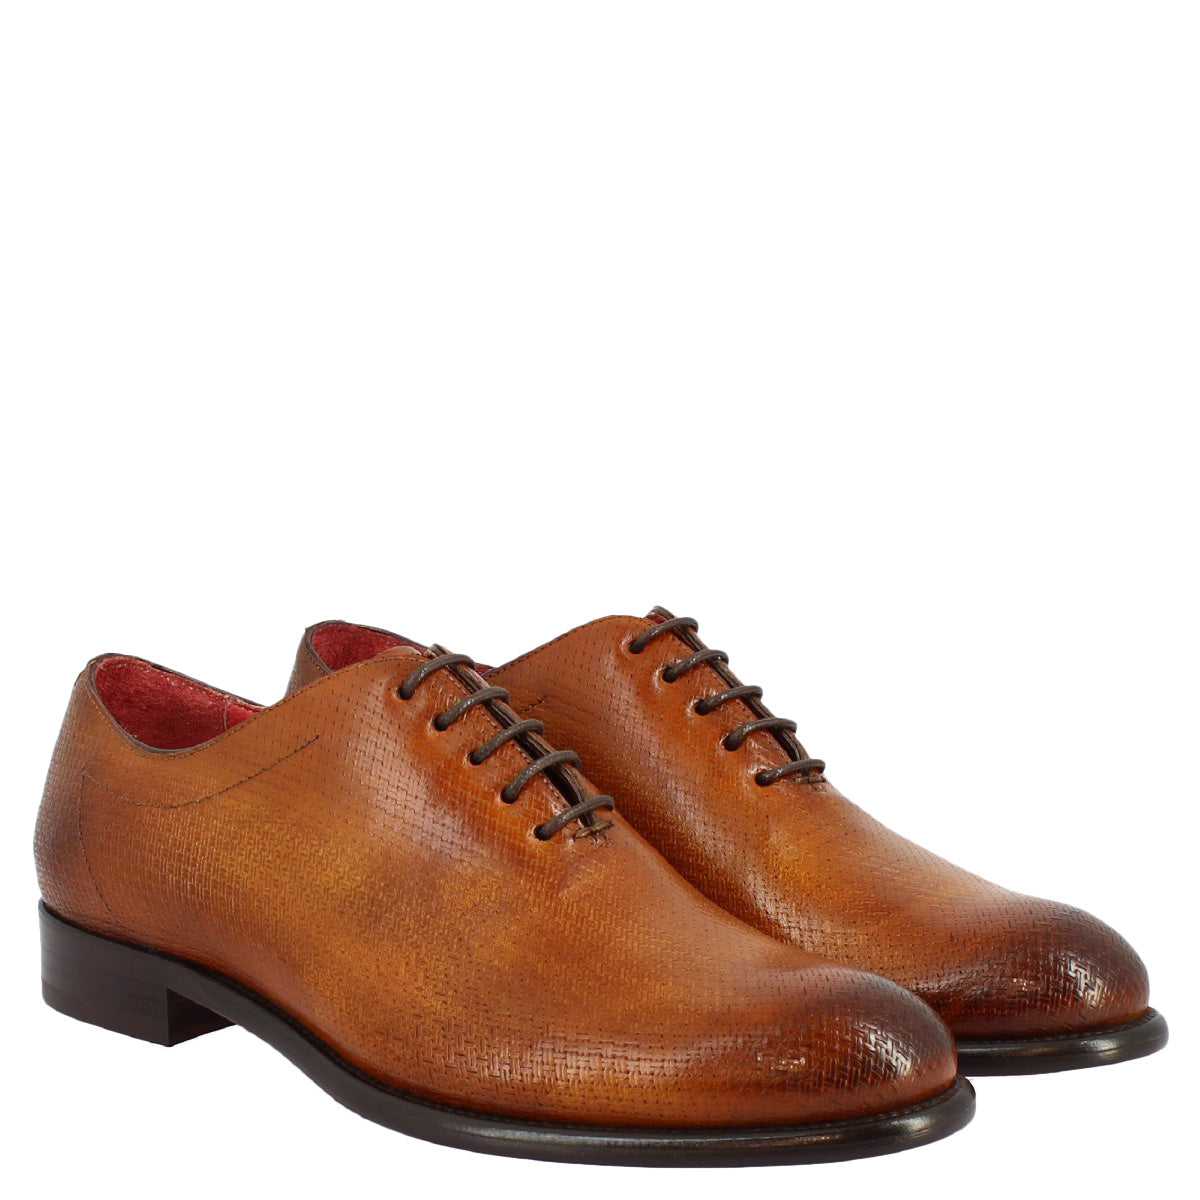 Men's brogues shoes with rounded toe handmade in Siena Montecarlo calf